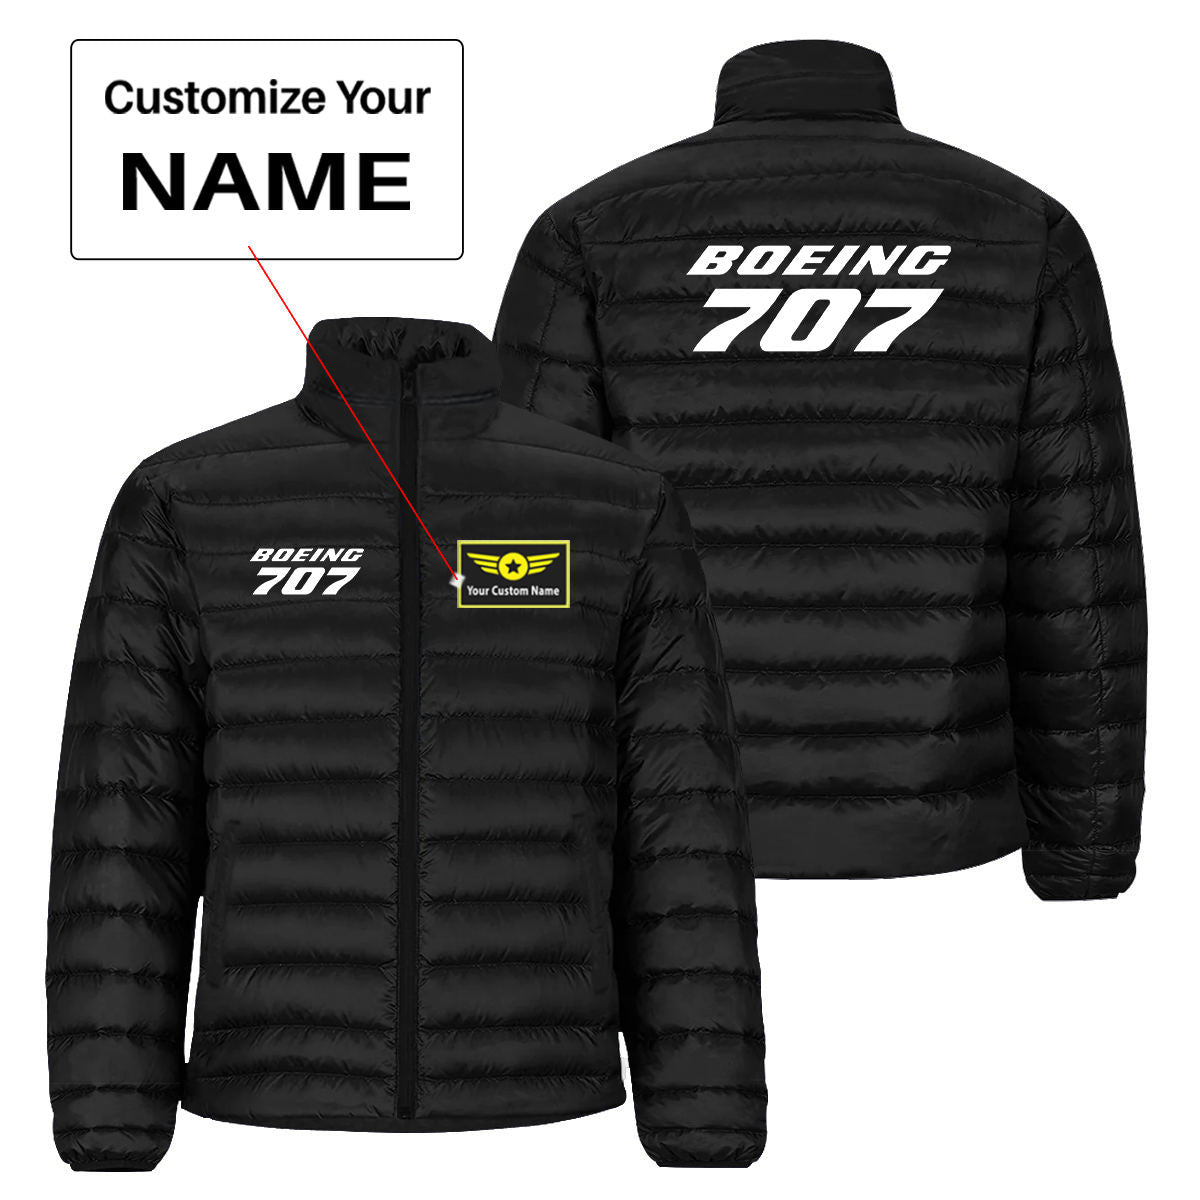 Boeing 707 & Text Designed Padded Jackets